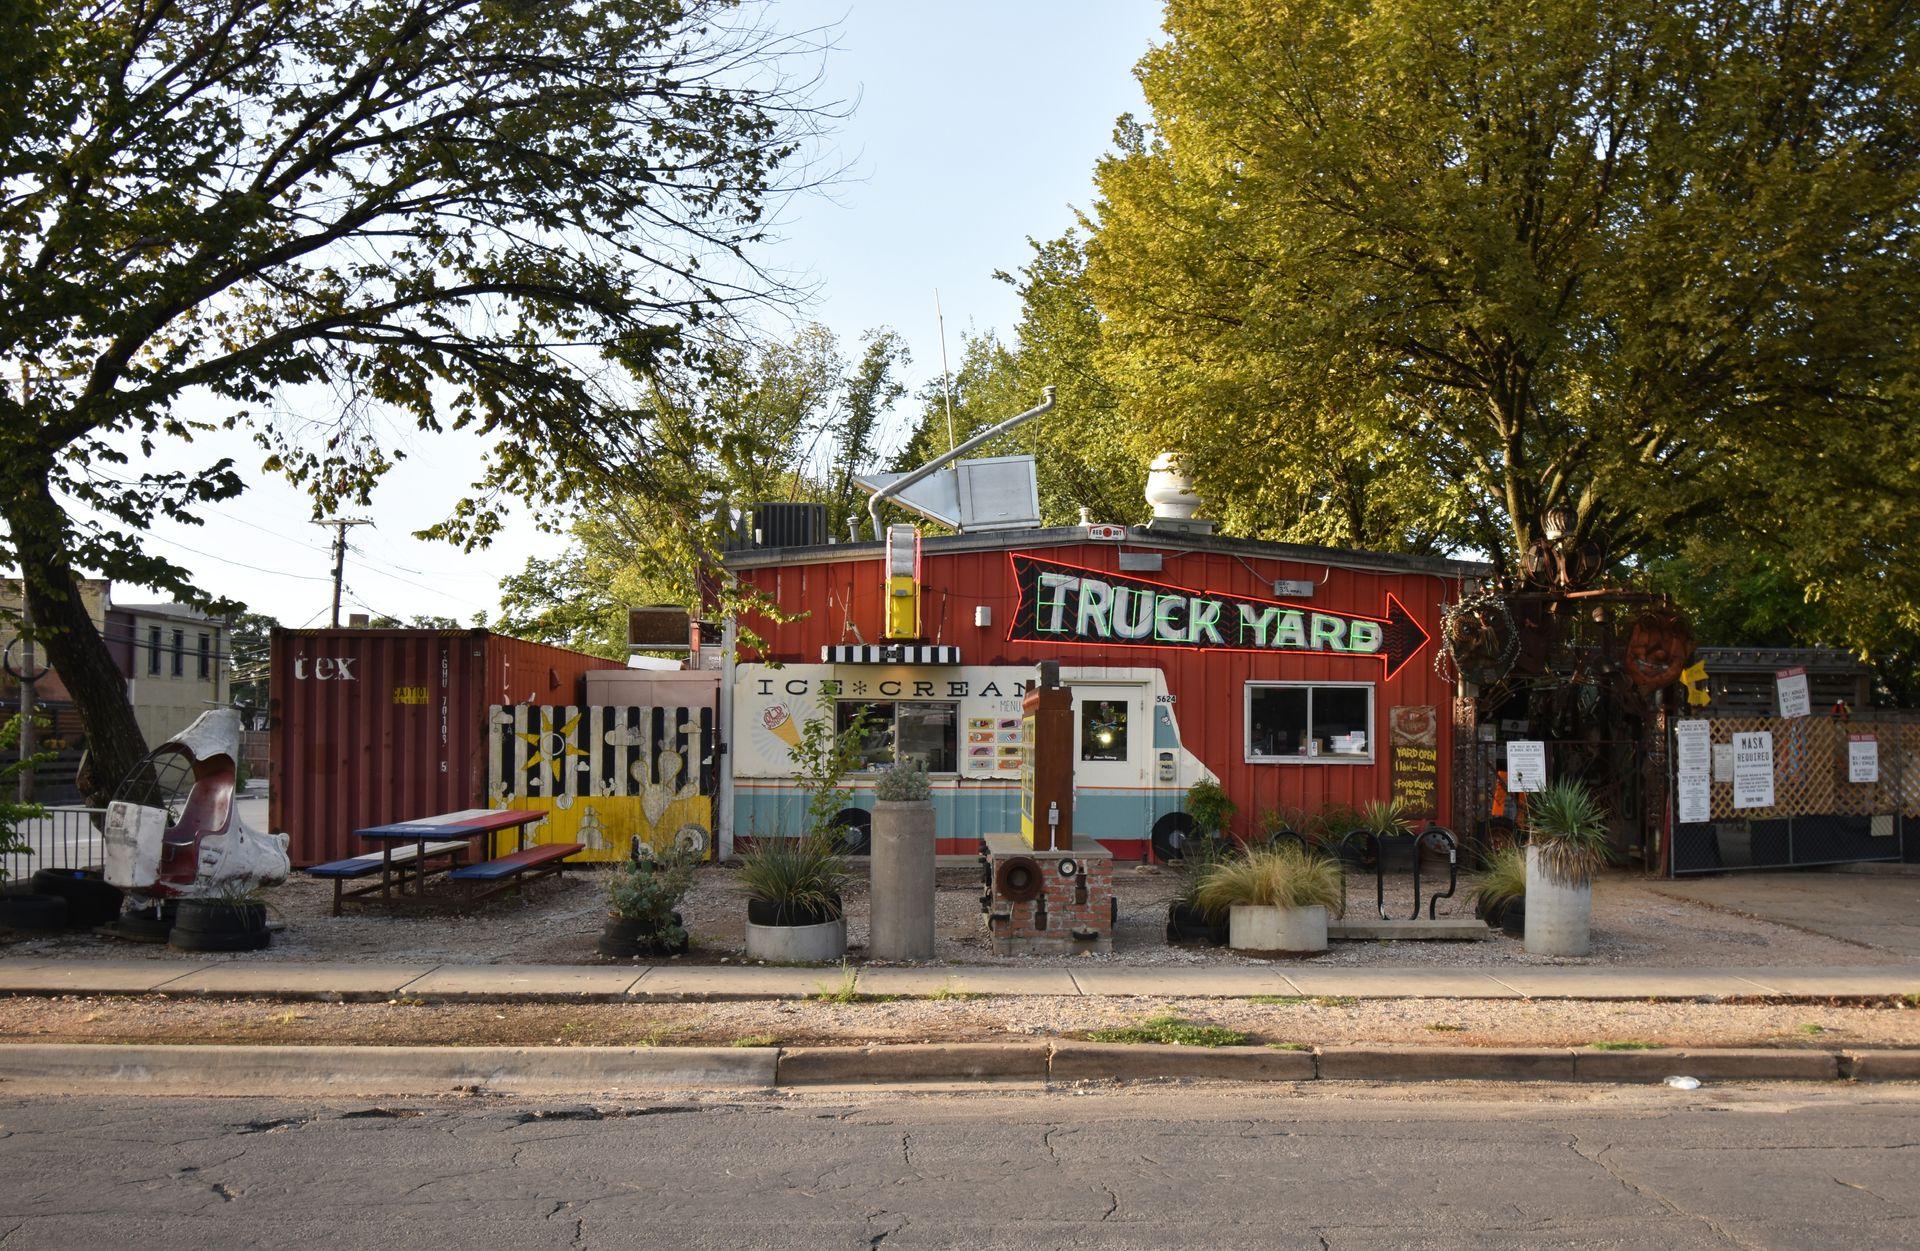 The exterior of Truck Yard, a popular bar in Dallas.